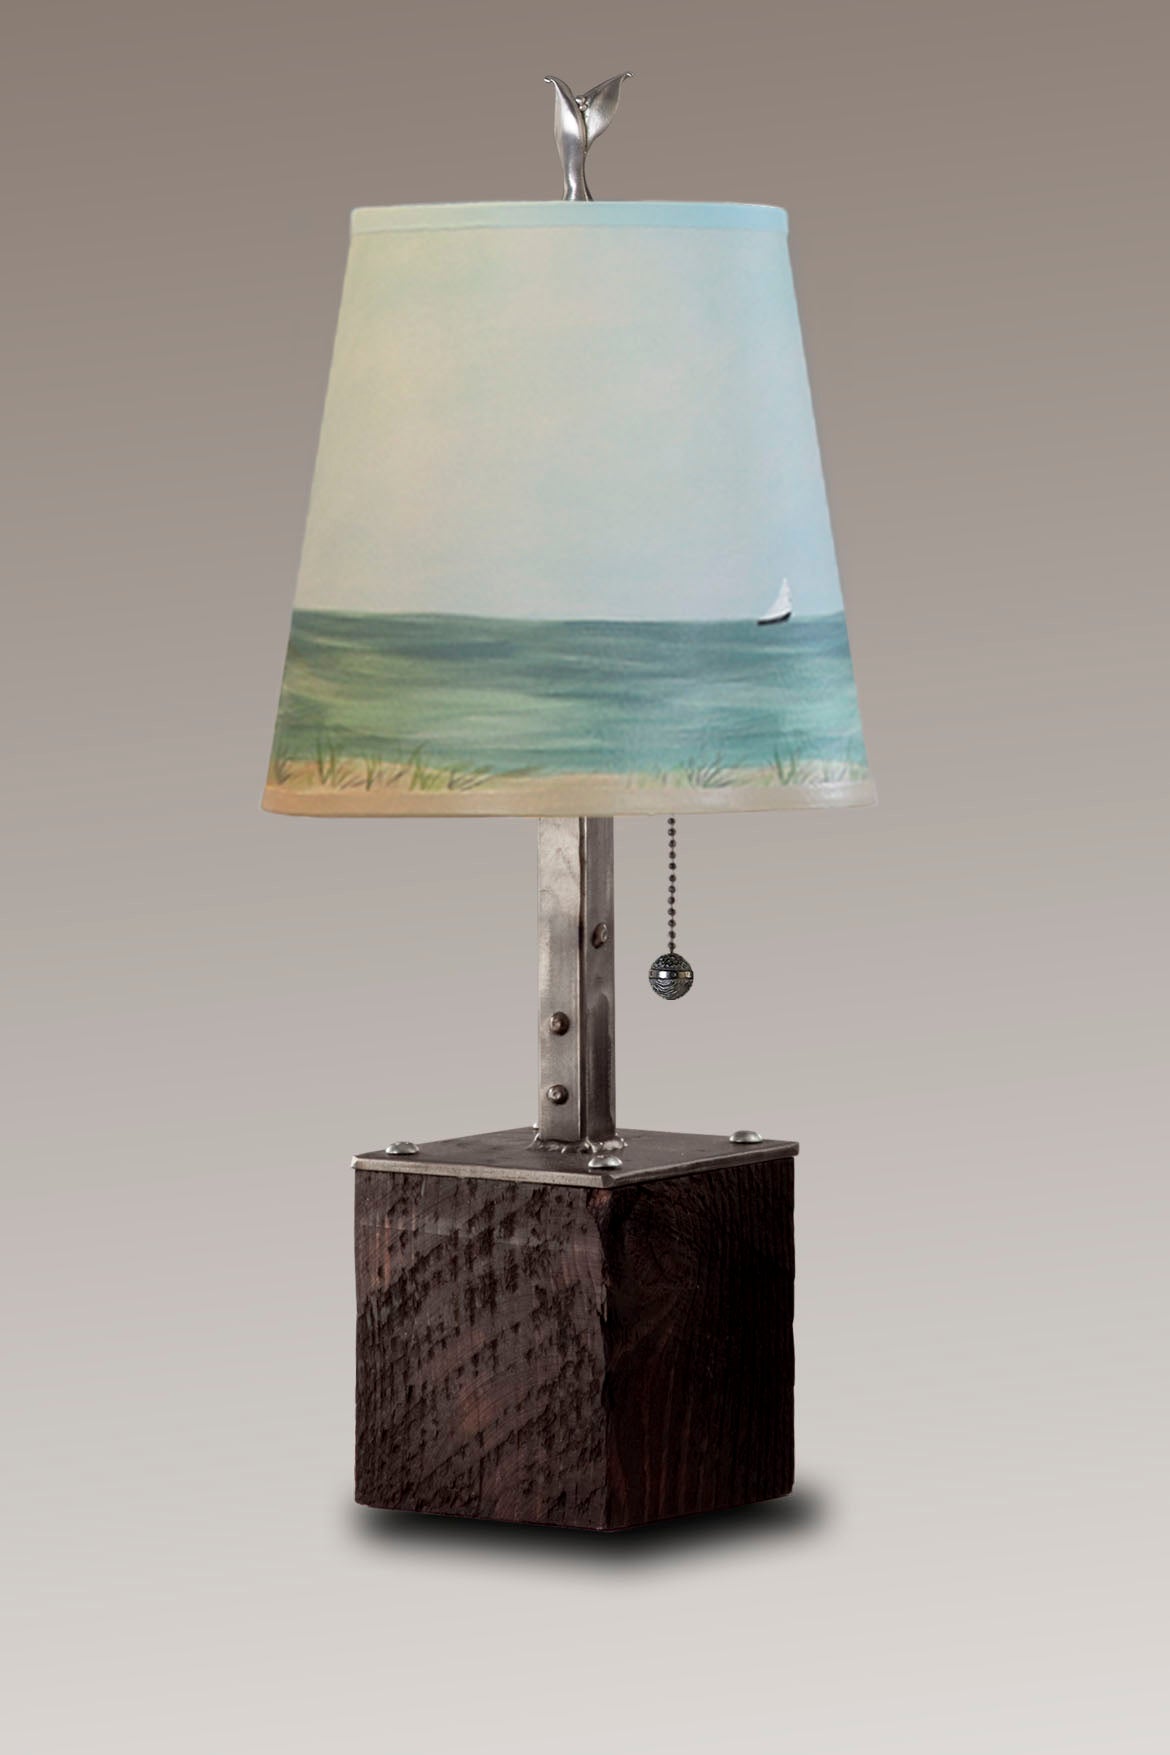 Janna Ugone &amp; Co Table Lamps Steel Table Lamp on Reclaimed Wood with Small Drum Shade in Shore